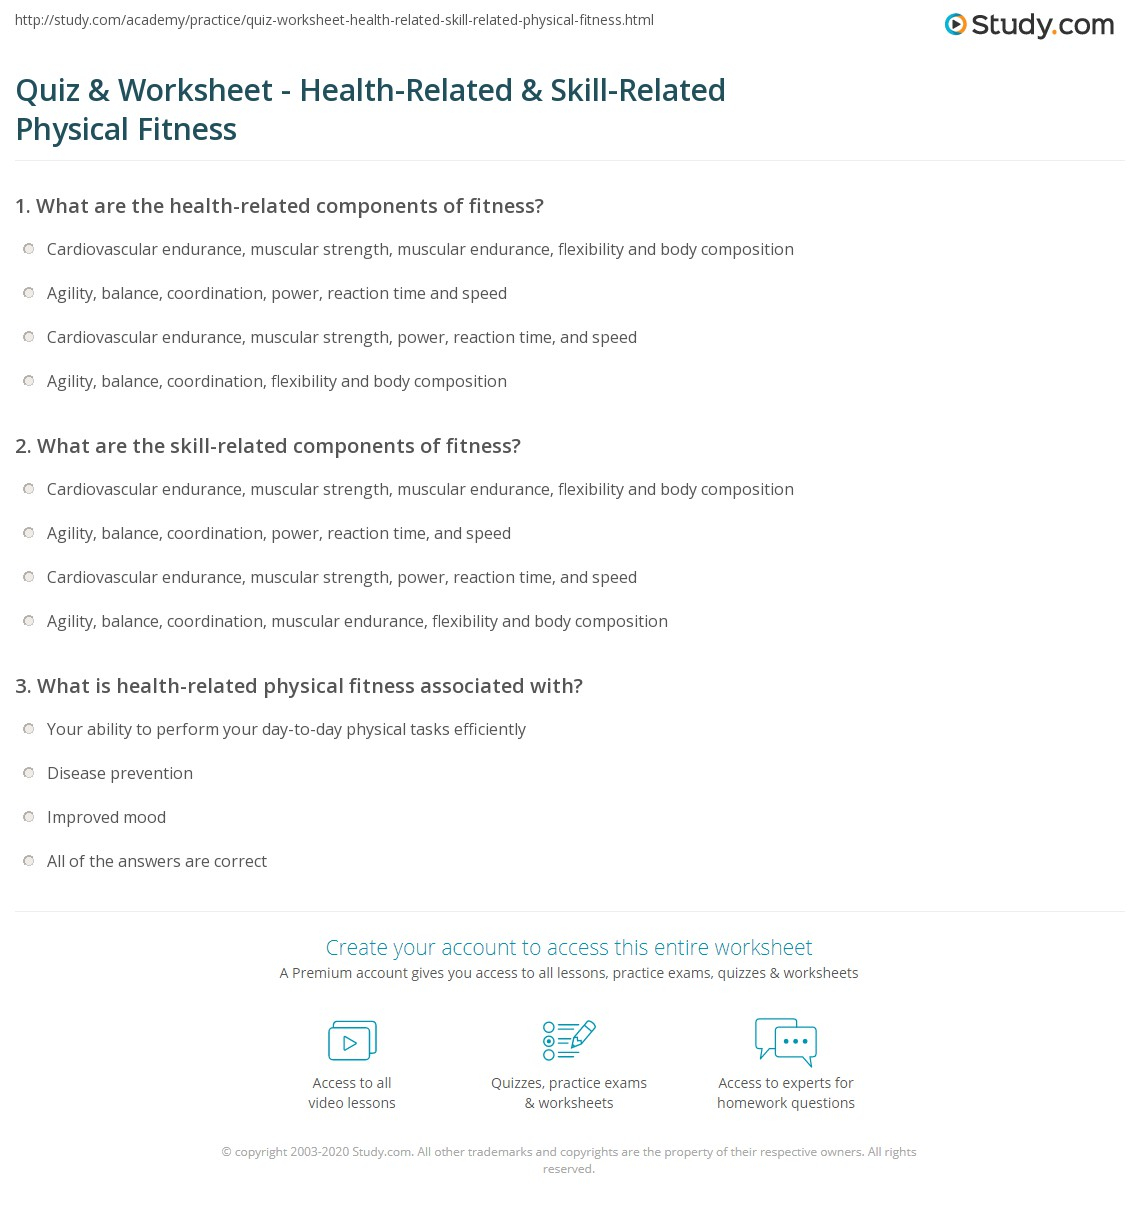 Quiz Worksheet Health Related Skill Related Physical Fitness